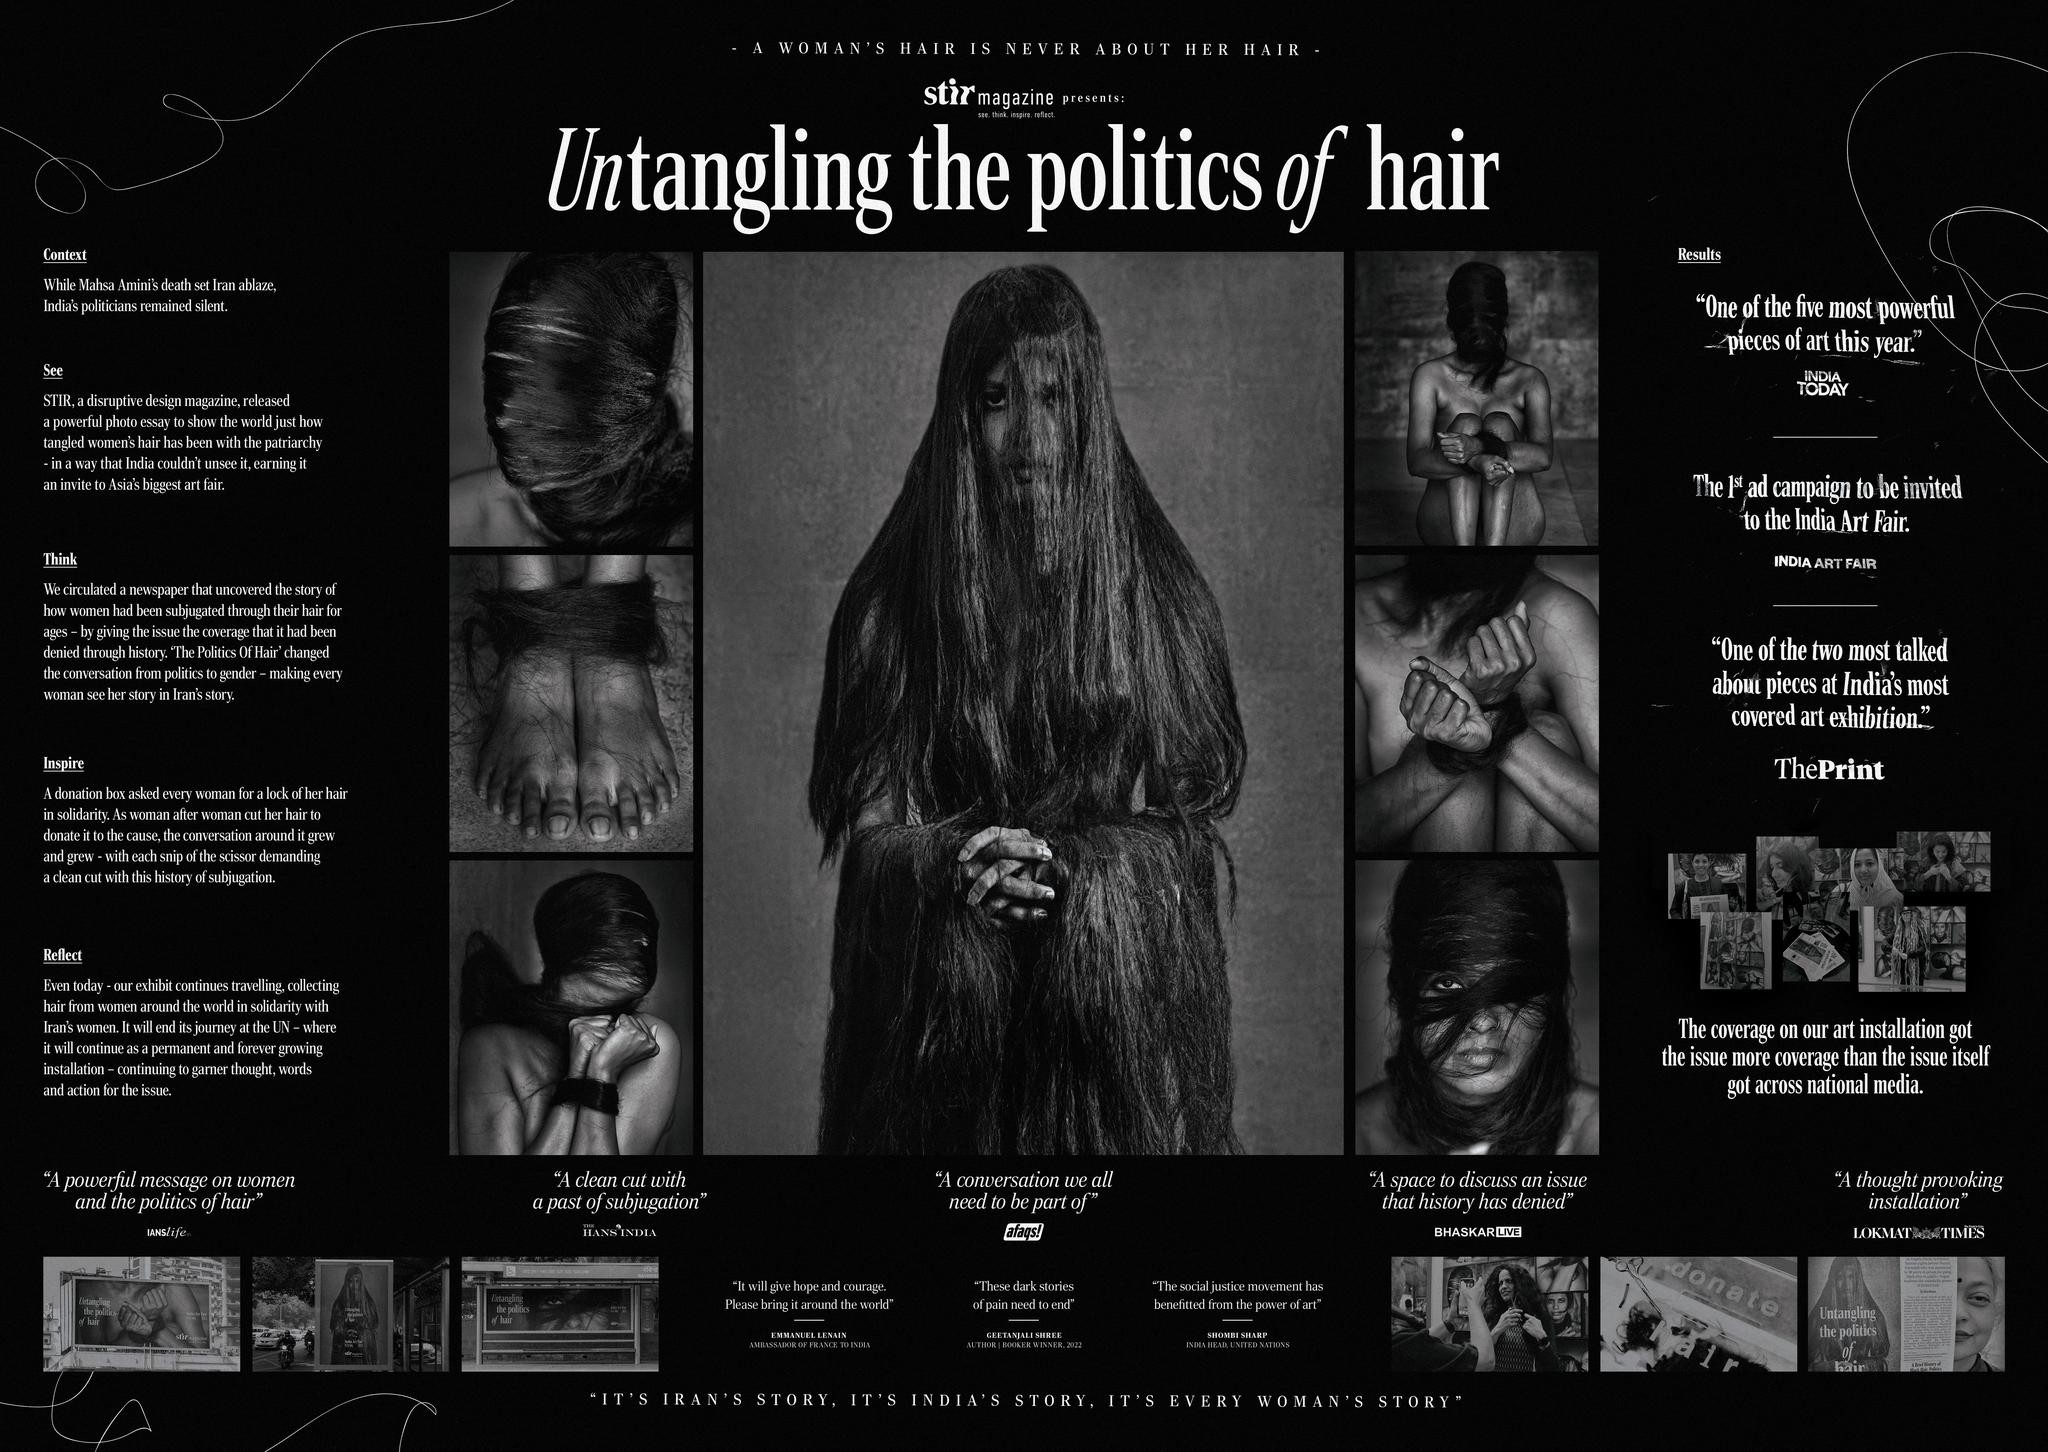 UNTANGLING THE POLITICS OF HAIR